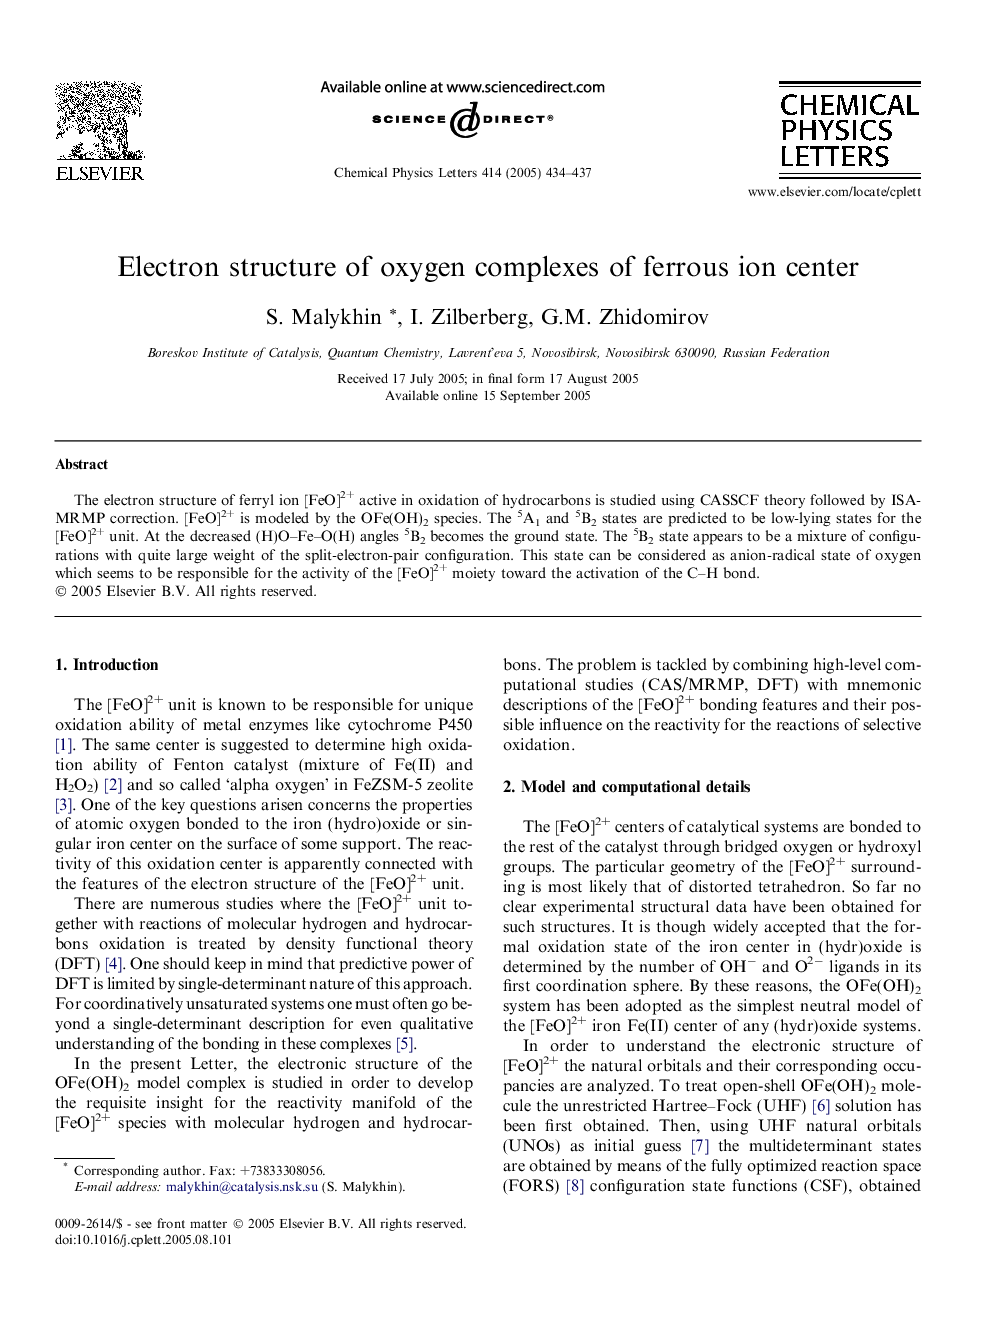 Electron structure of oxygen complexes of ferrous ion center